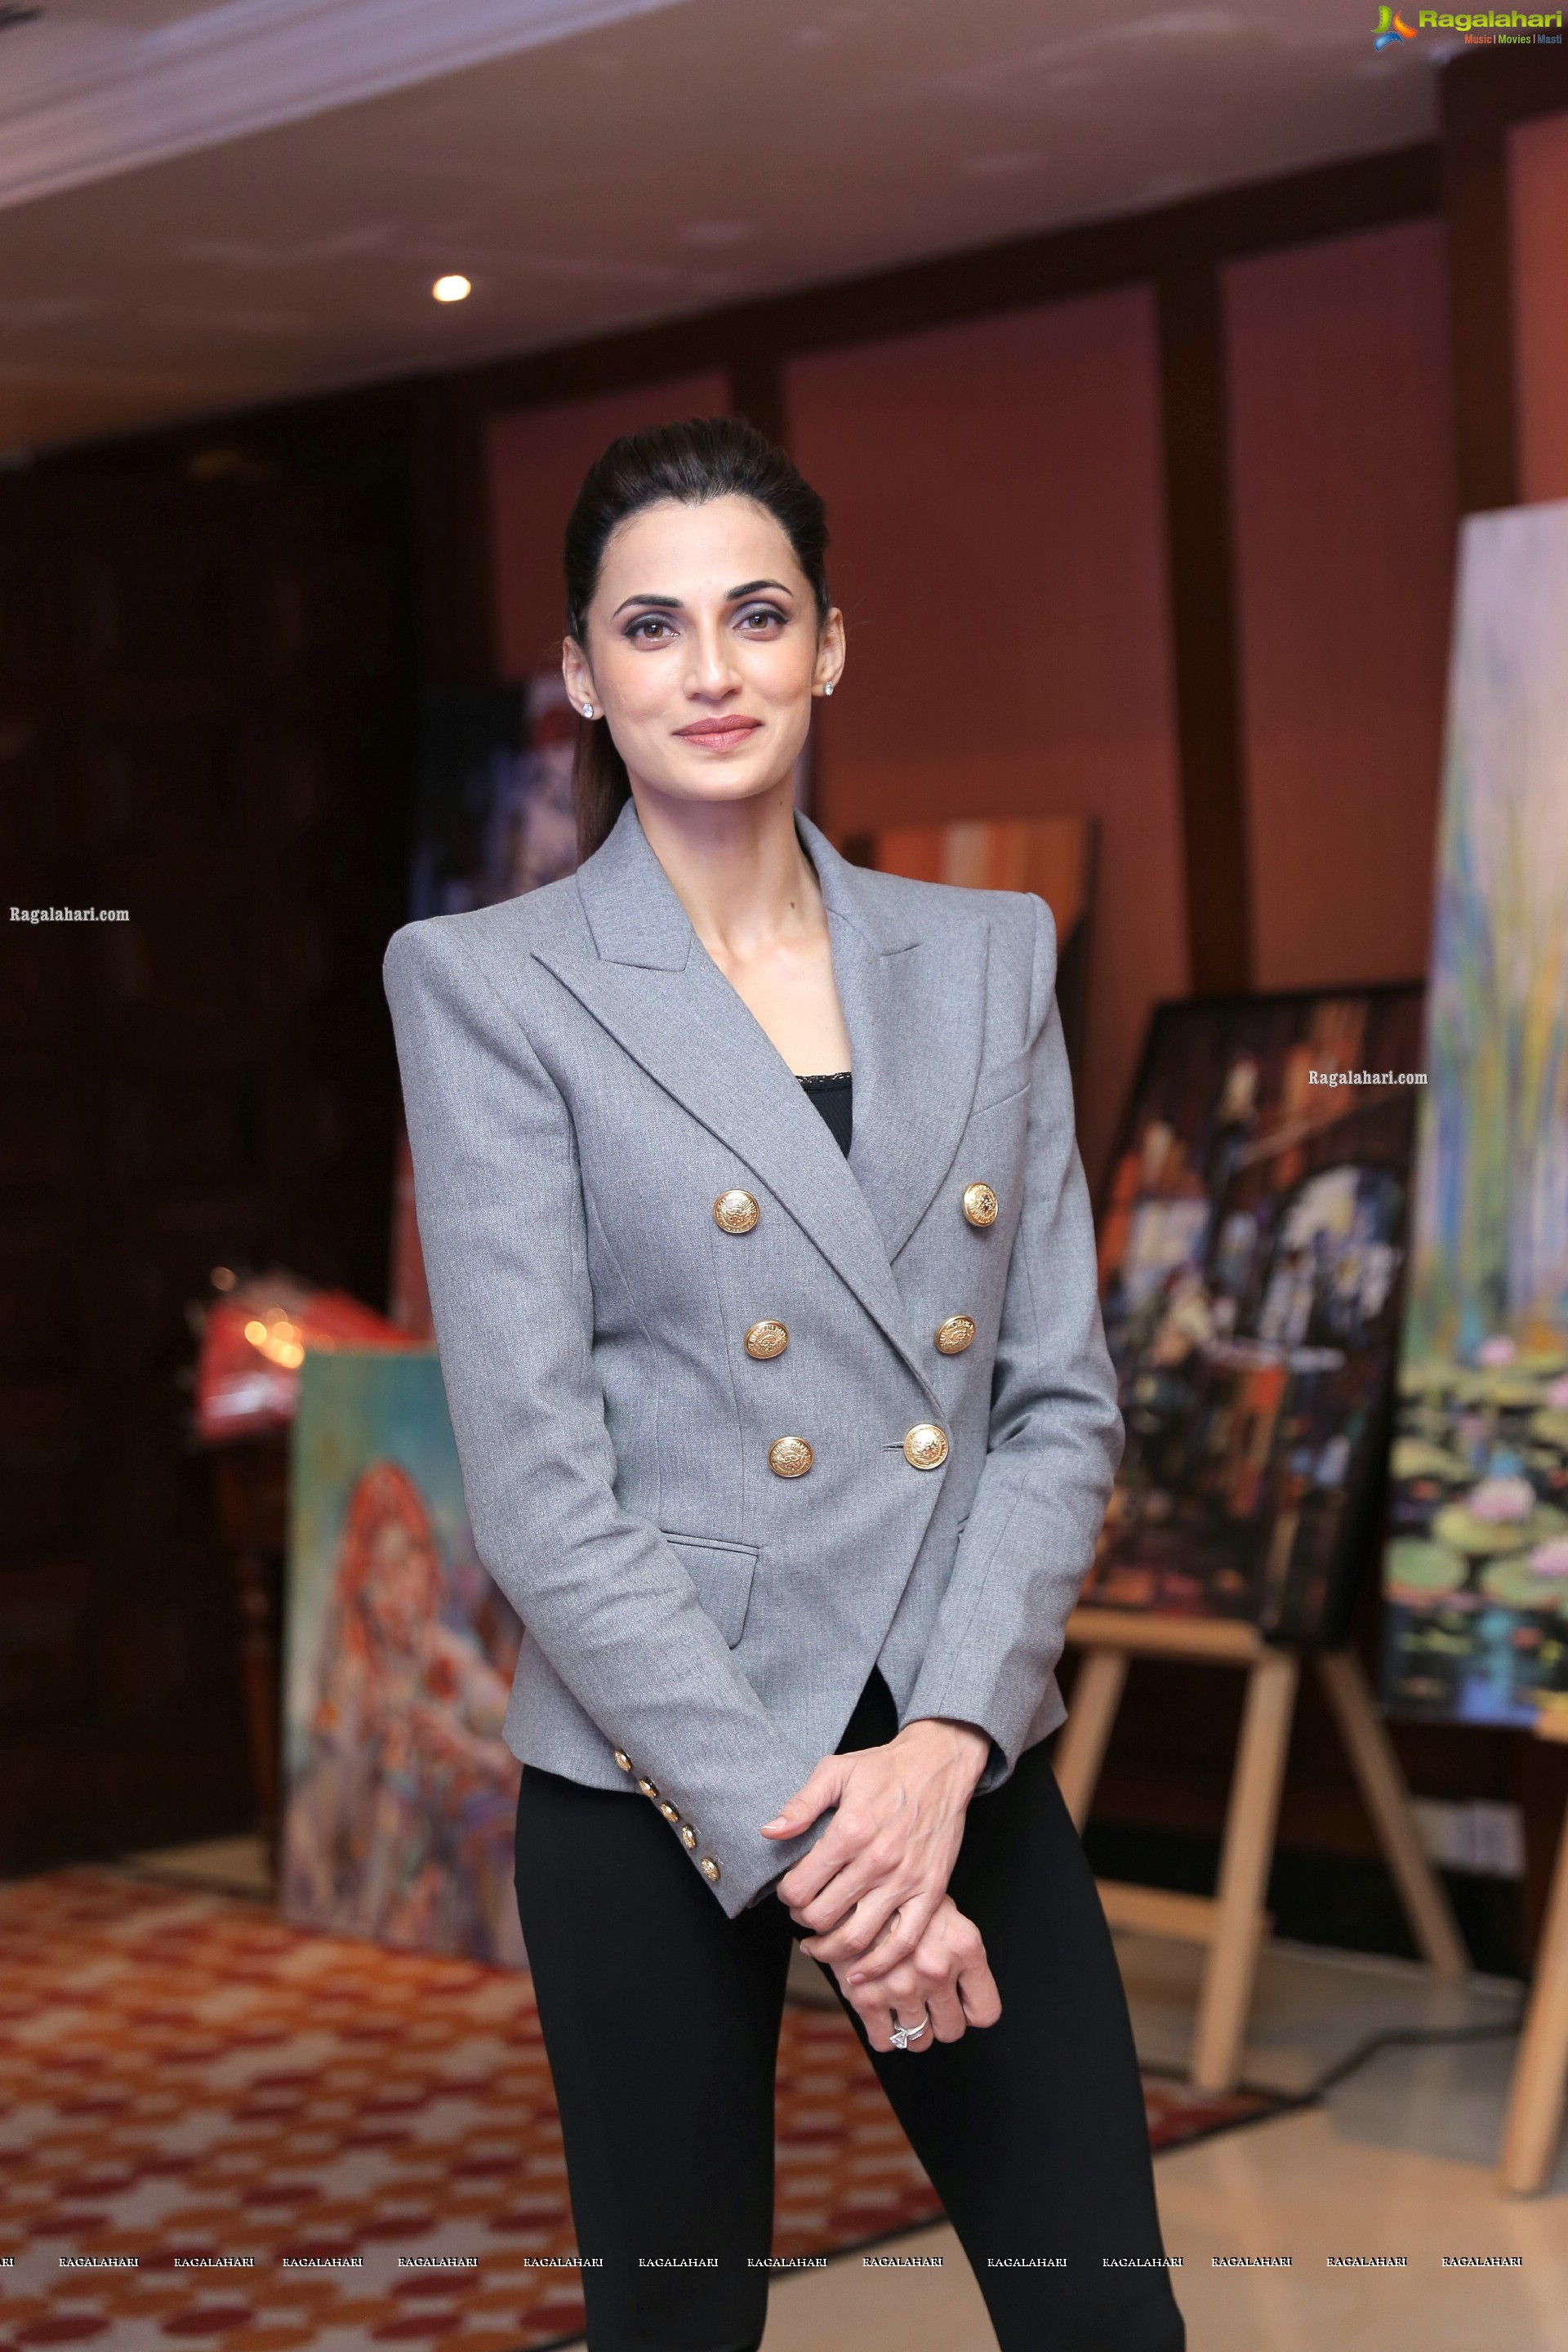 Shilpa Reddy at Paintings Exhibition Behance Artfest 2021, HD Photo Gallery